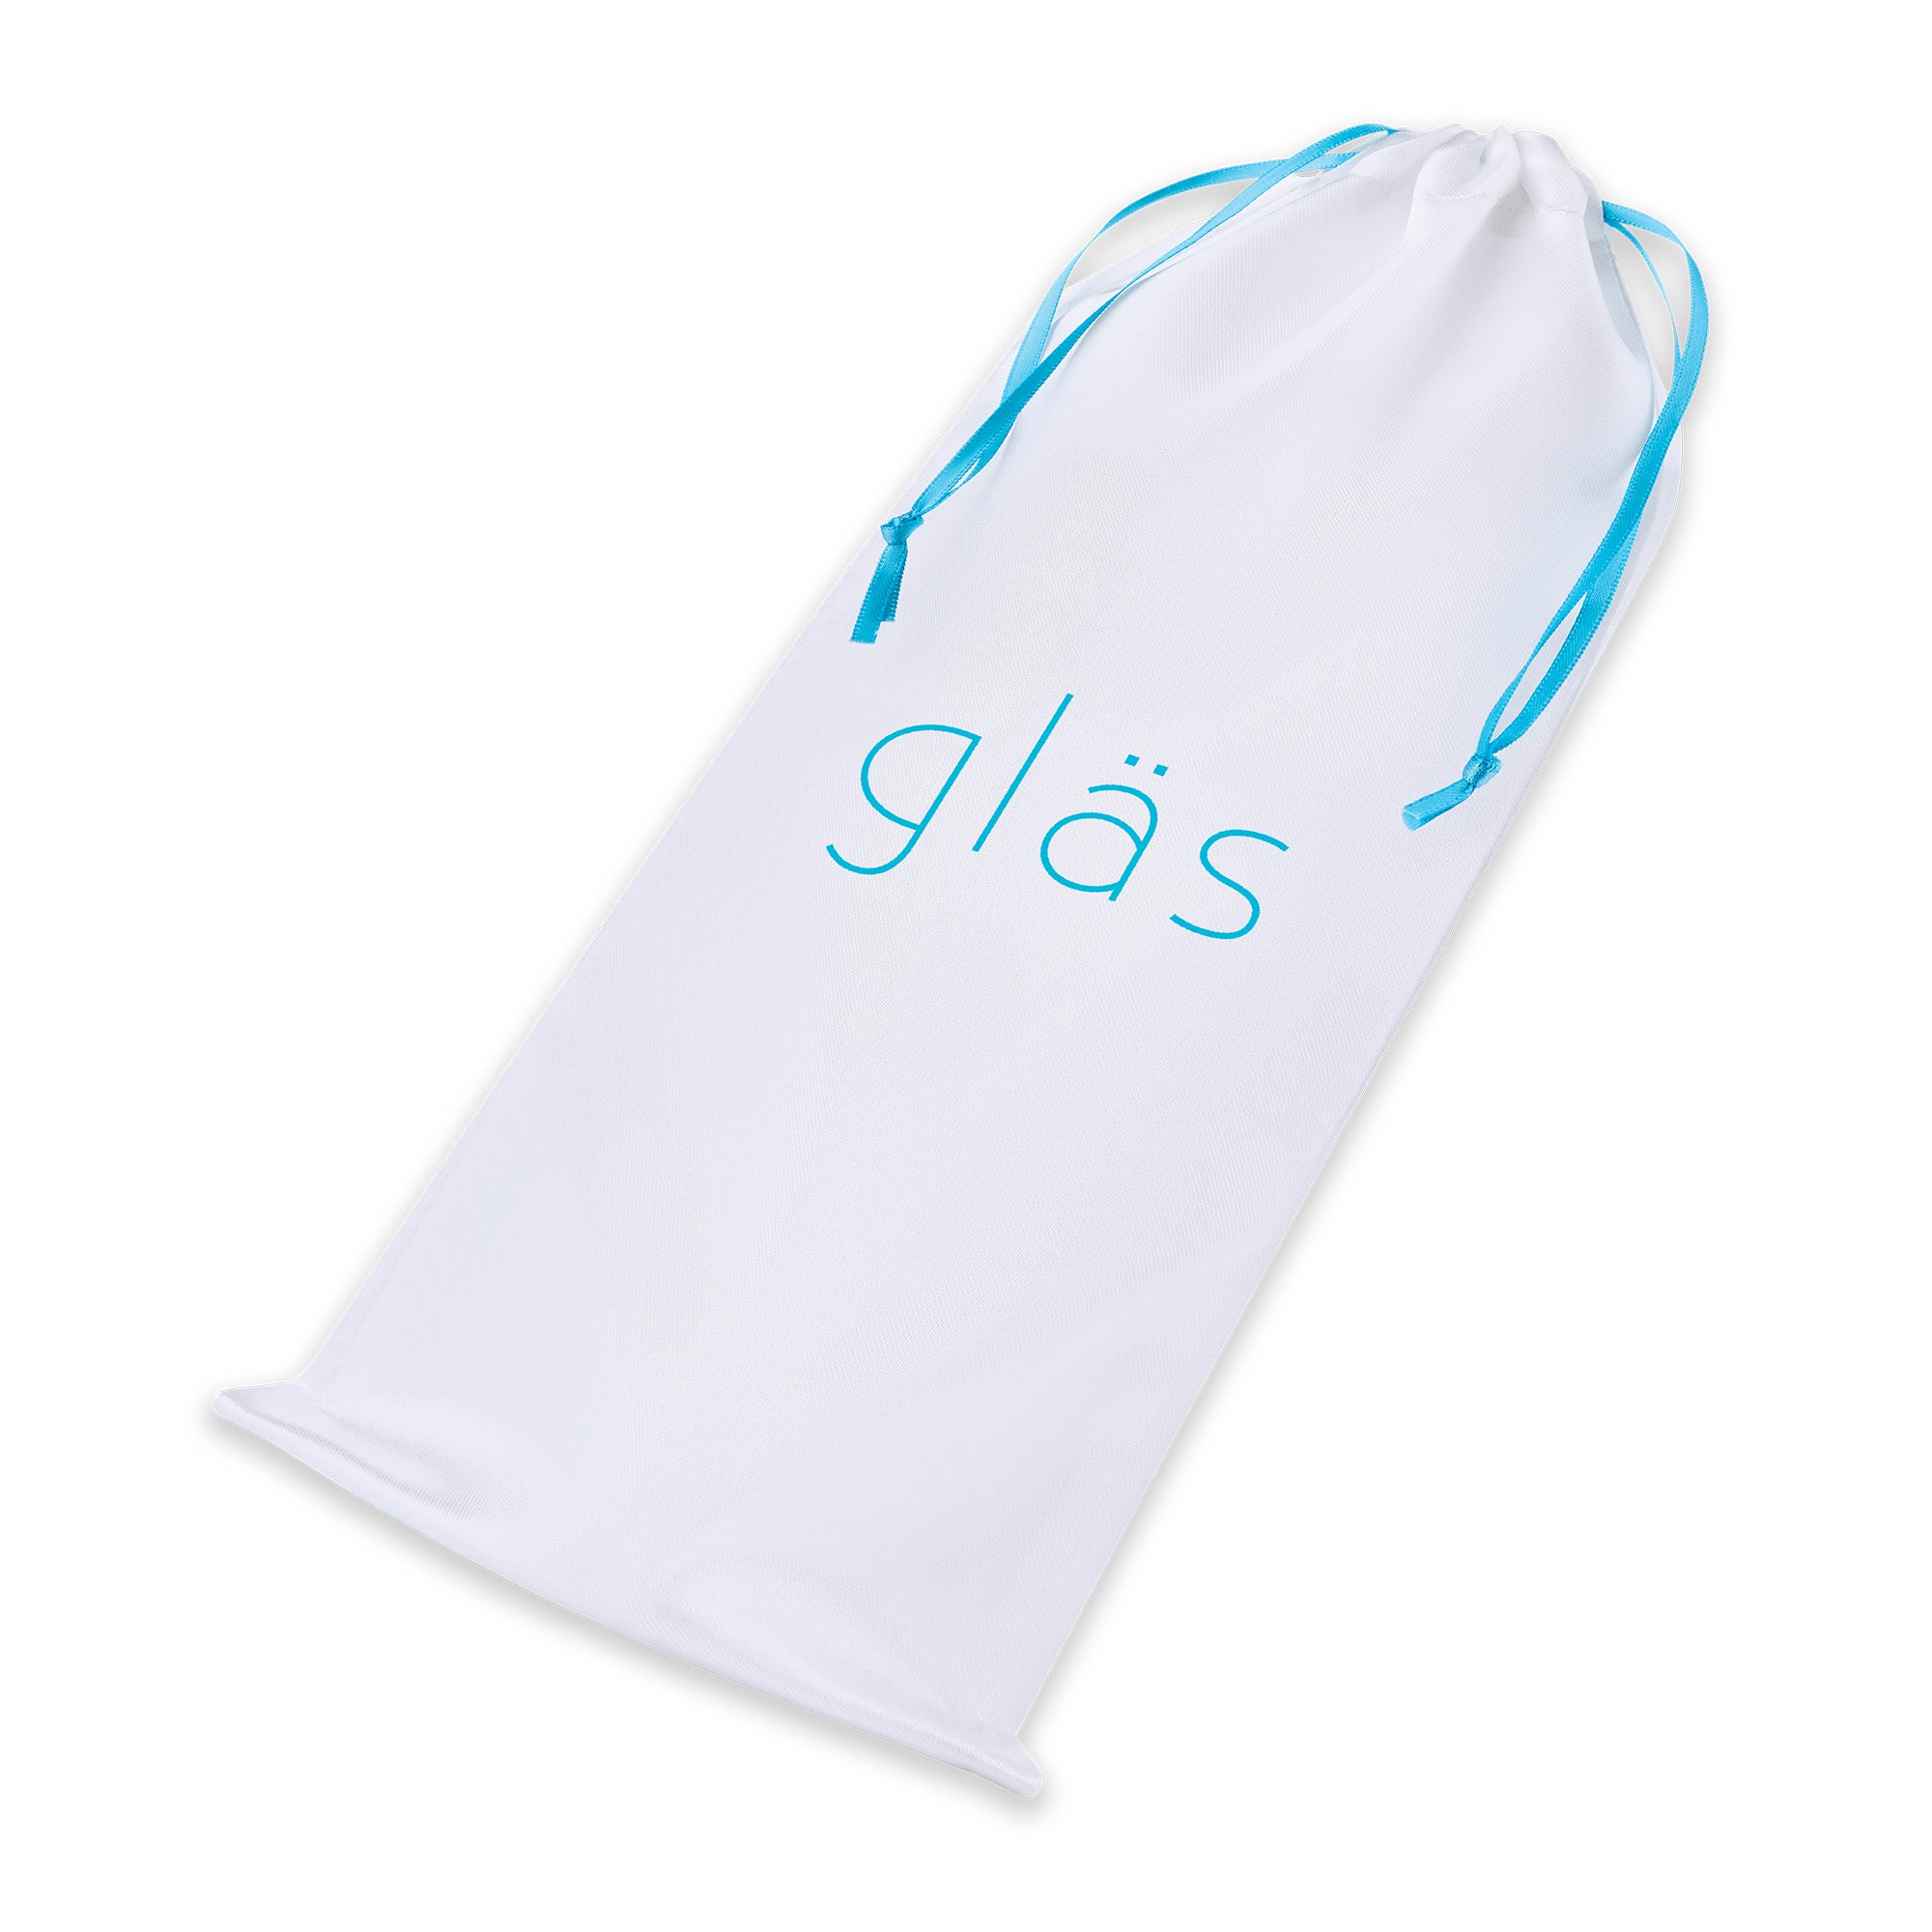 Storage Pouch of the Gläs 7 inch Realistic Curved Glass G-Spot Dildo